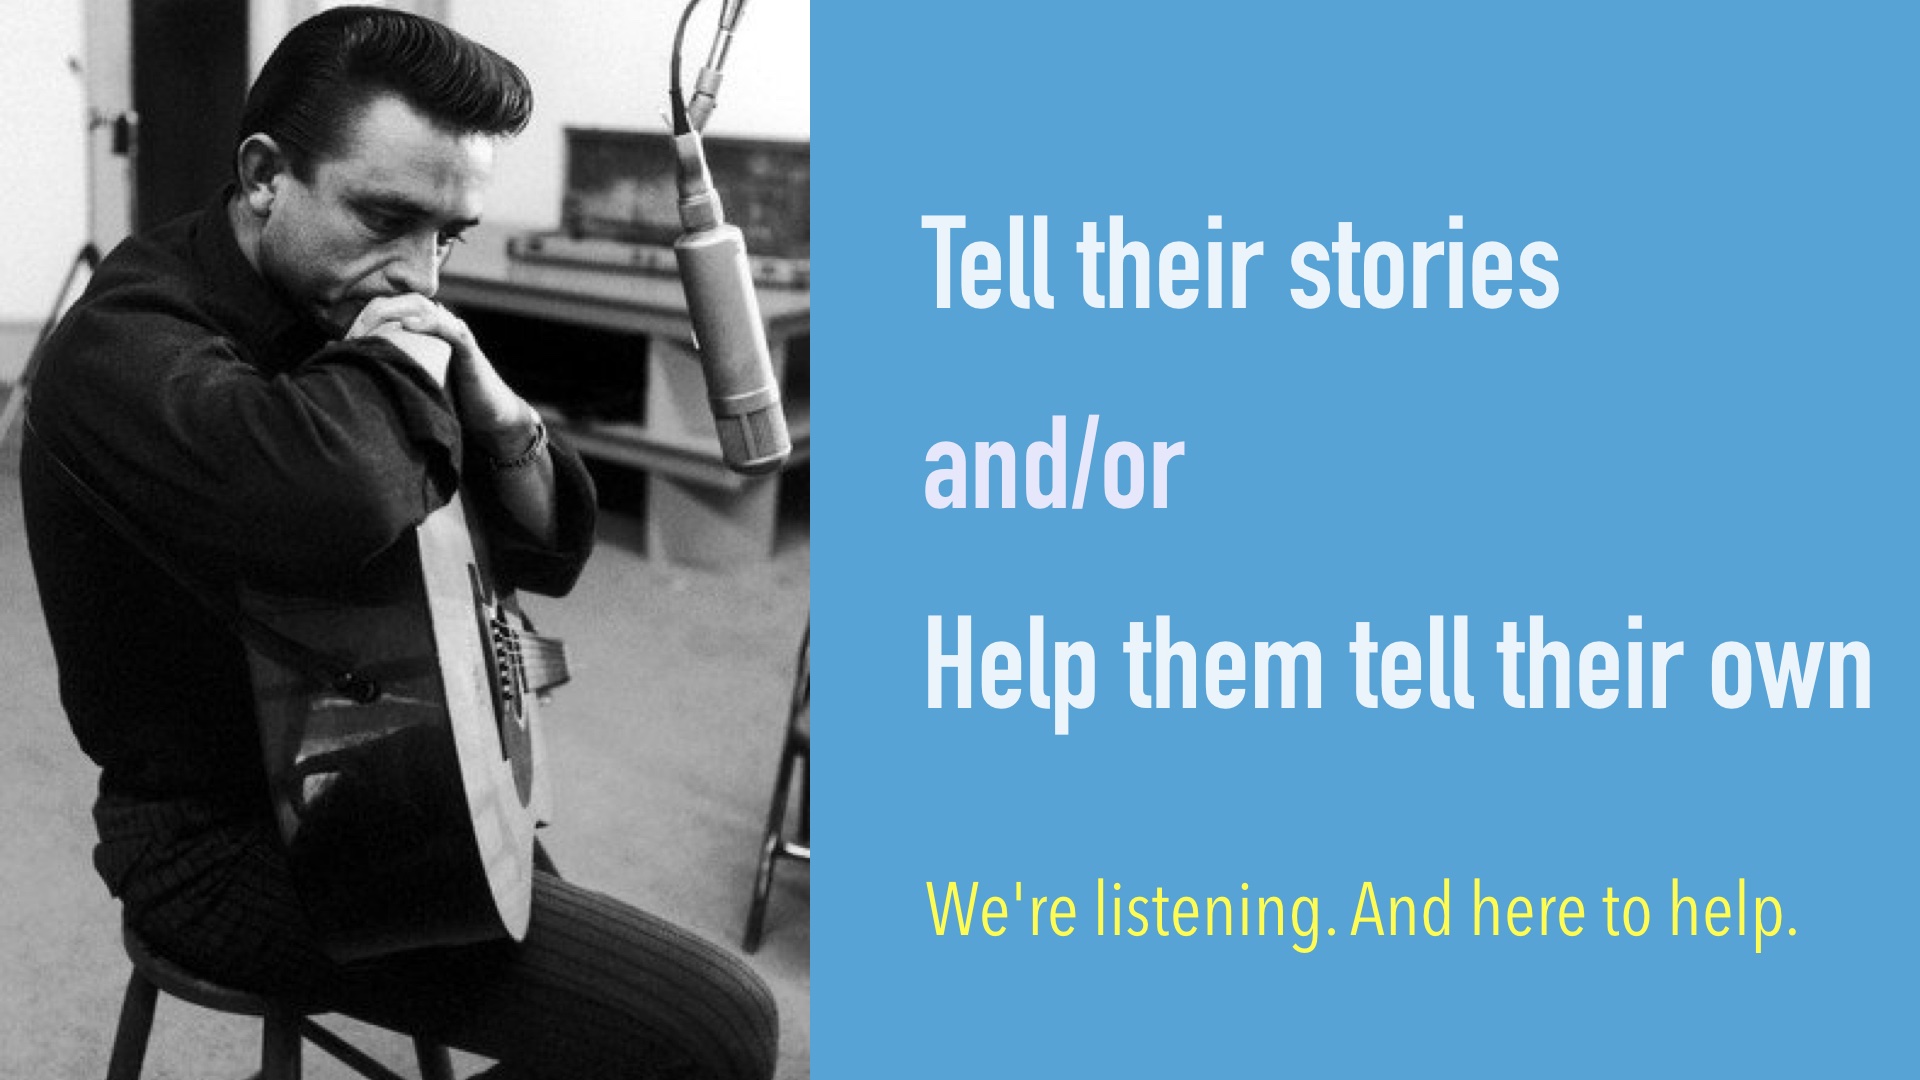 Image of Johnny Cash sitting in front of a microphone sort of hunched over his guitar with the caption (to the side):Tell their stories and/or Help them tell their own. Subcaption: we'relistening and here to help